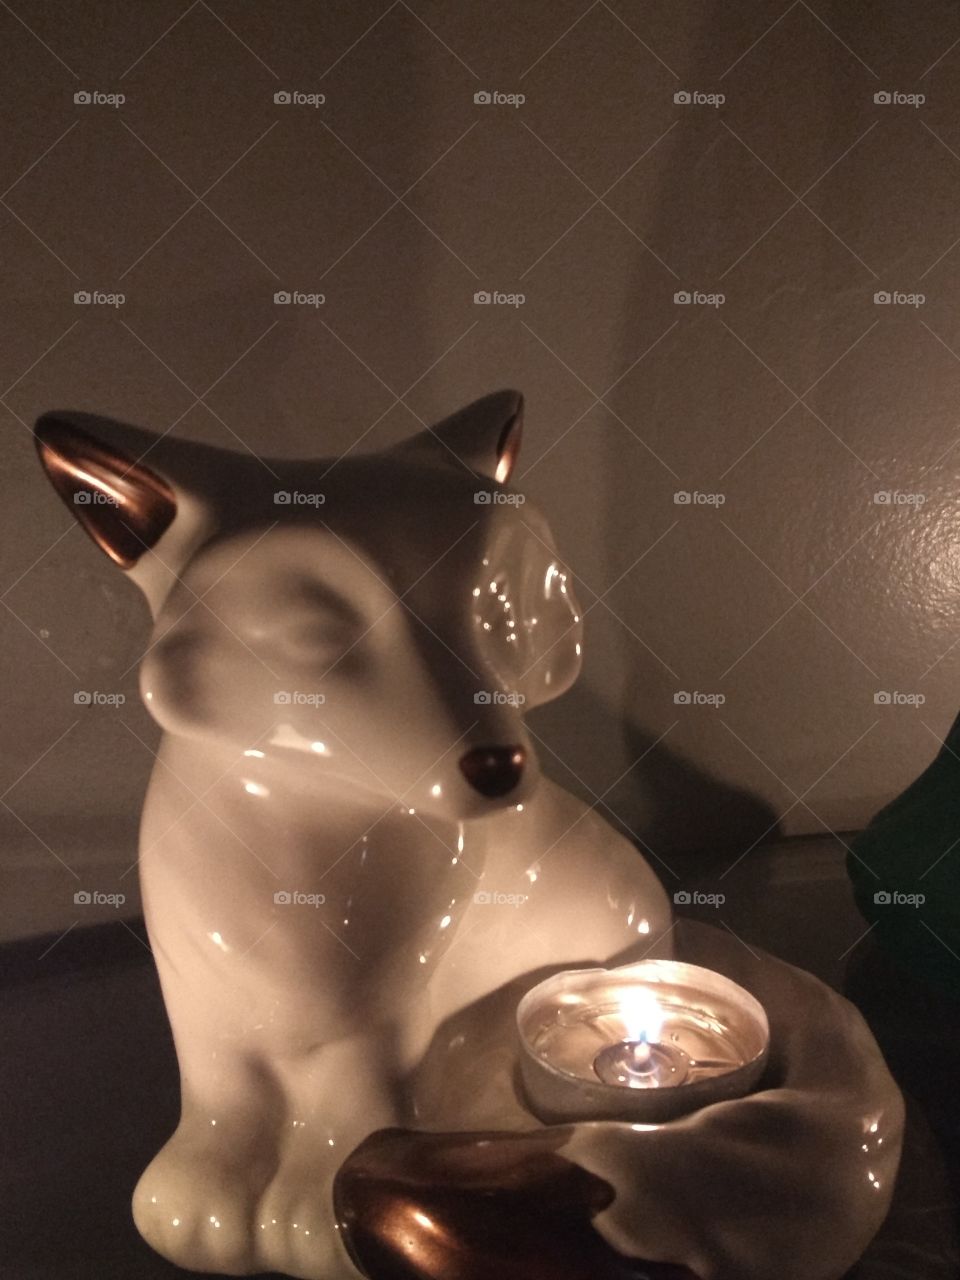 Fox in Candle Light